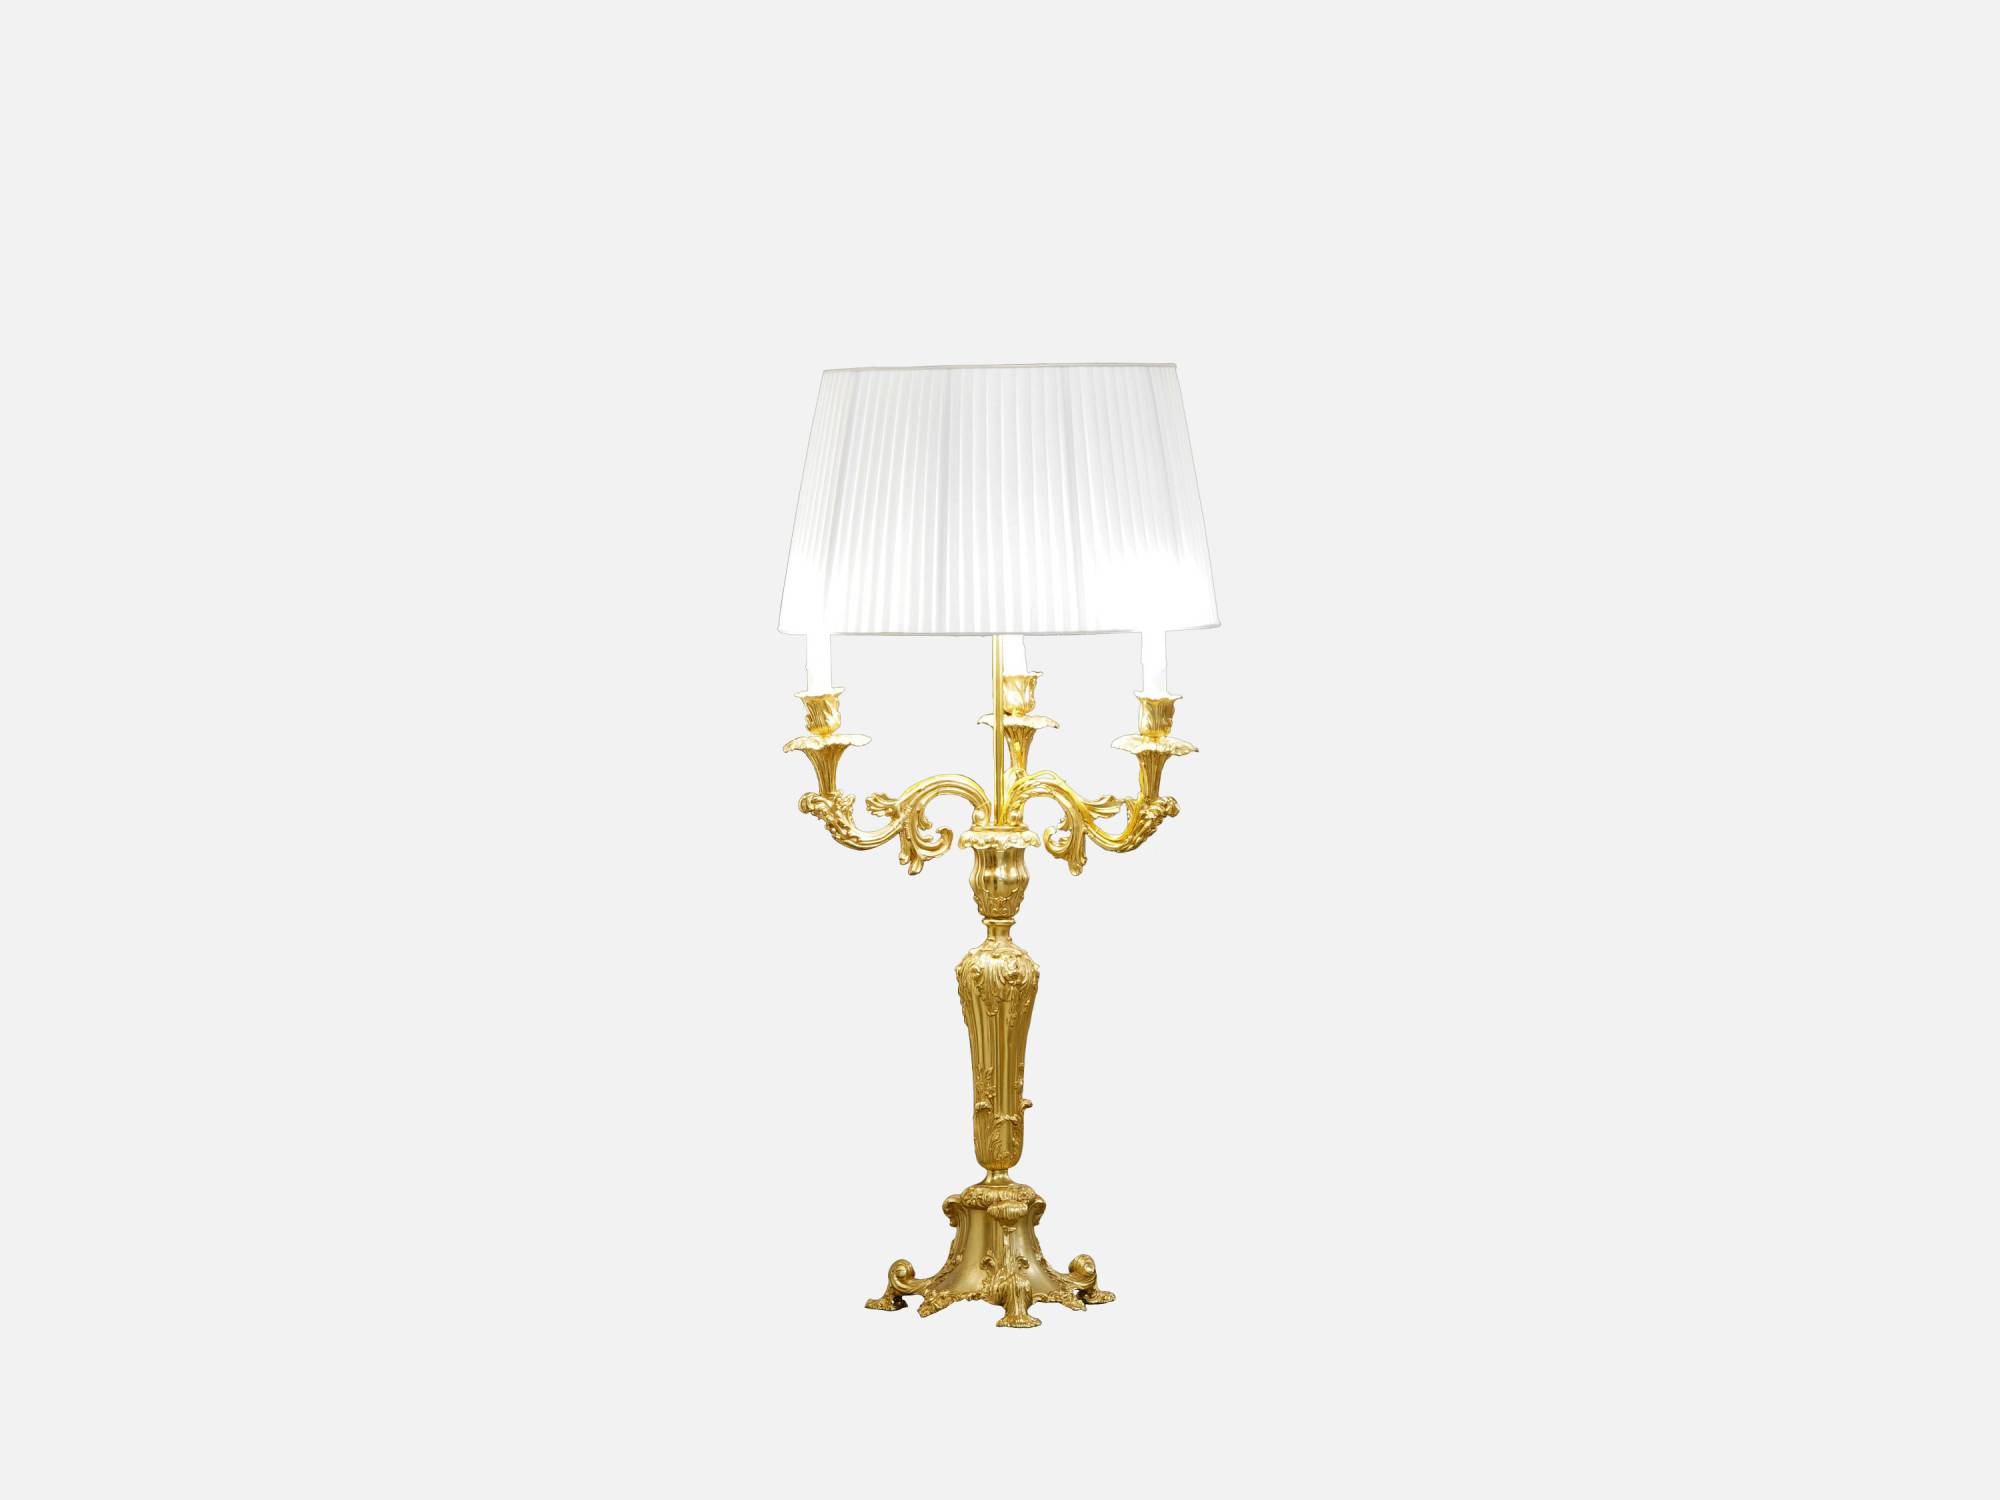 ART. 2210 – The elegance of luxury classic Lighting made in Italy by C.G. Capelletti.